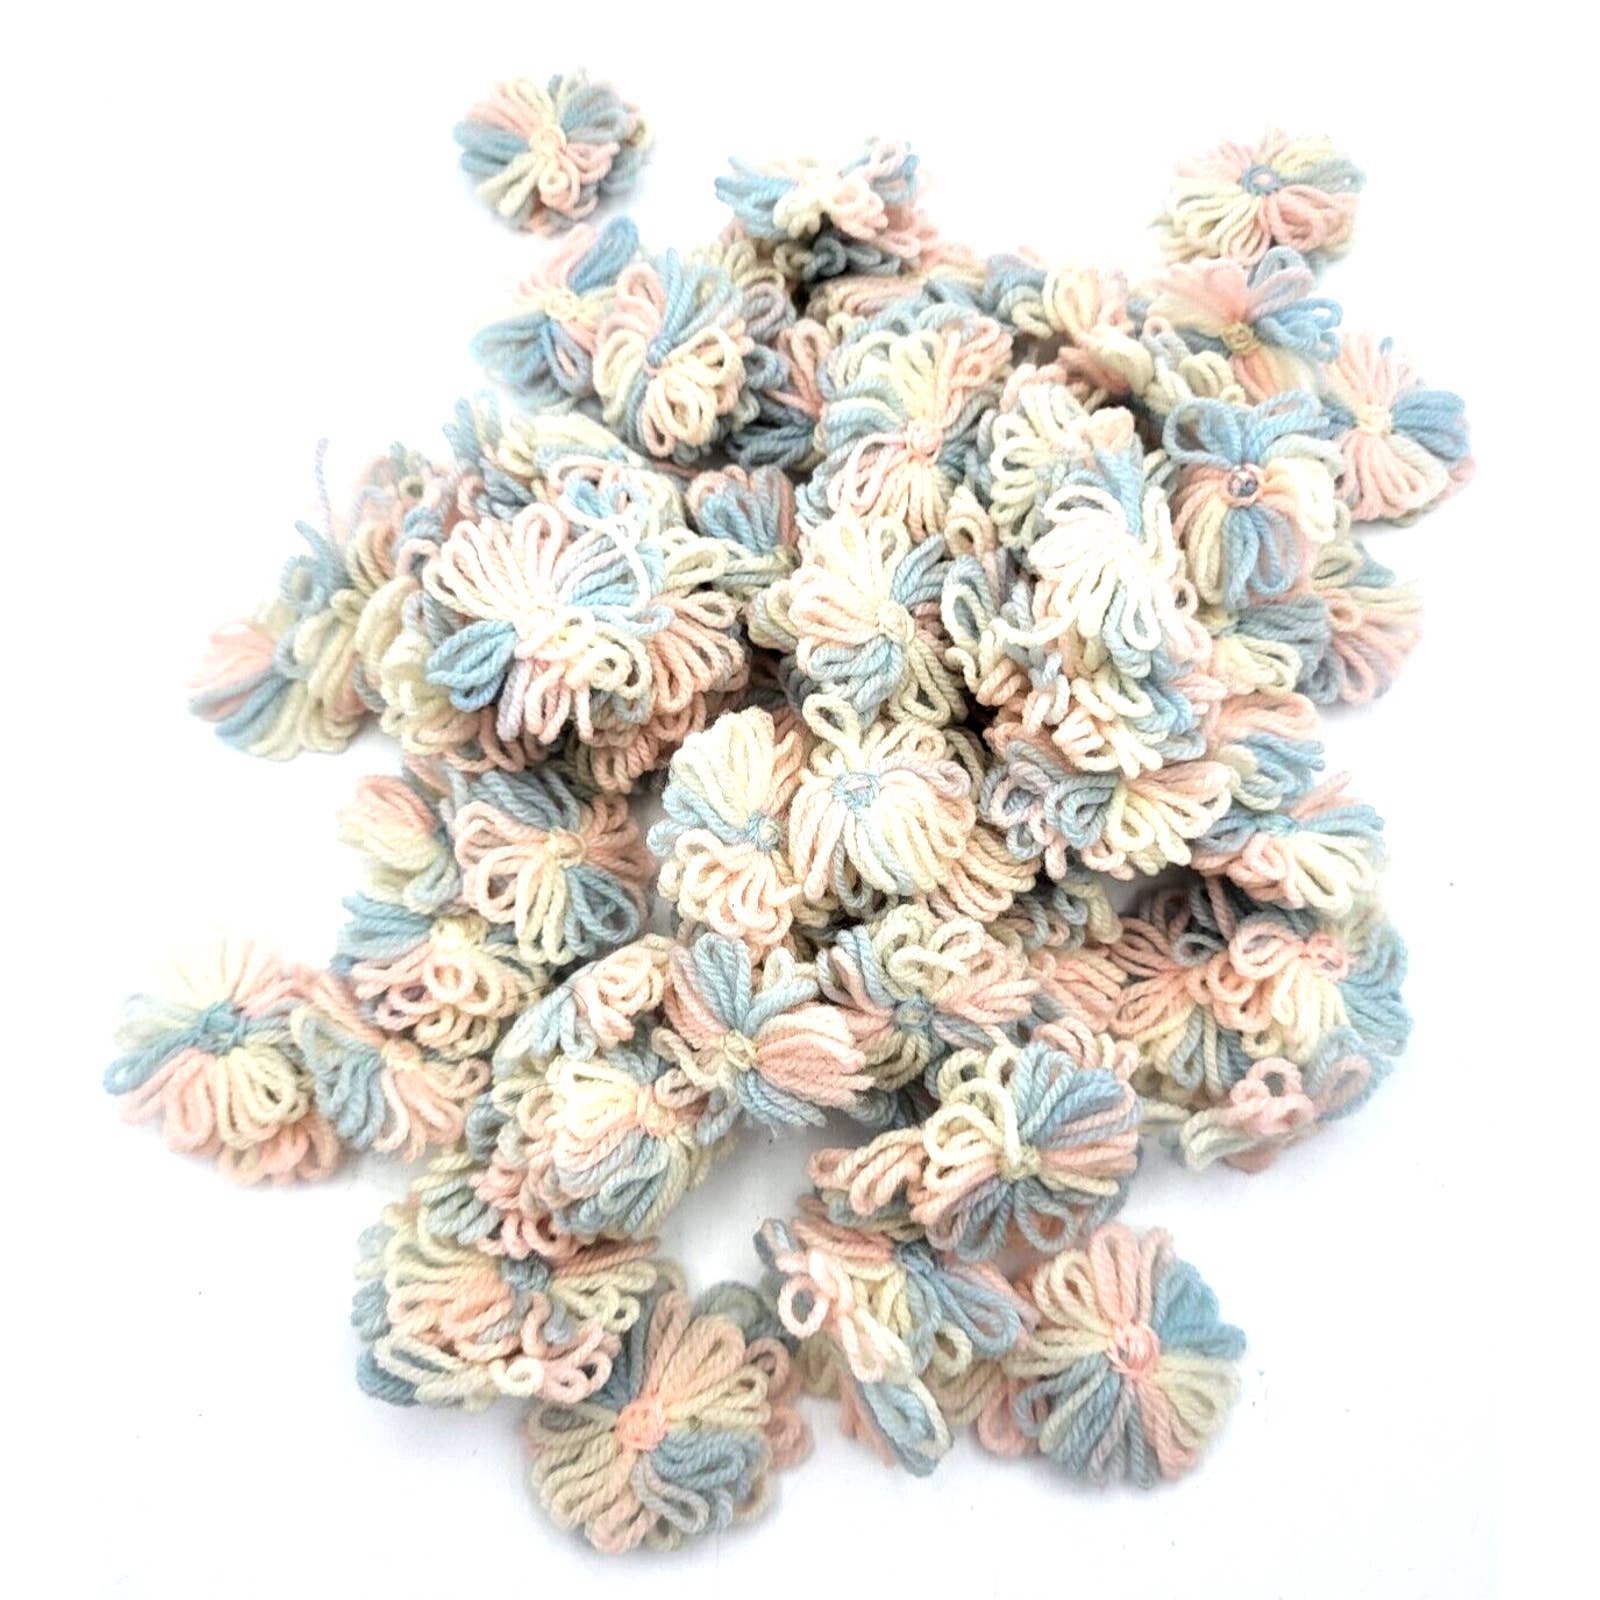 Vintage Pastel Colored Crocheted Flowers 1.25